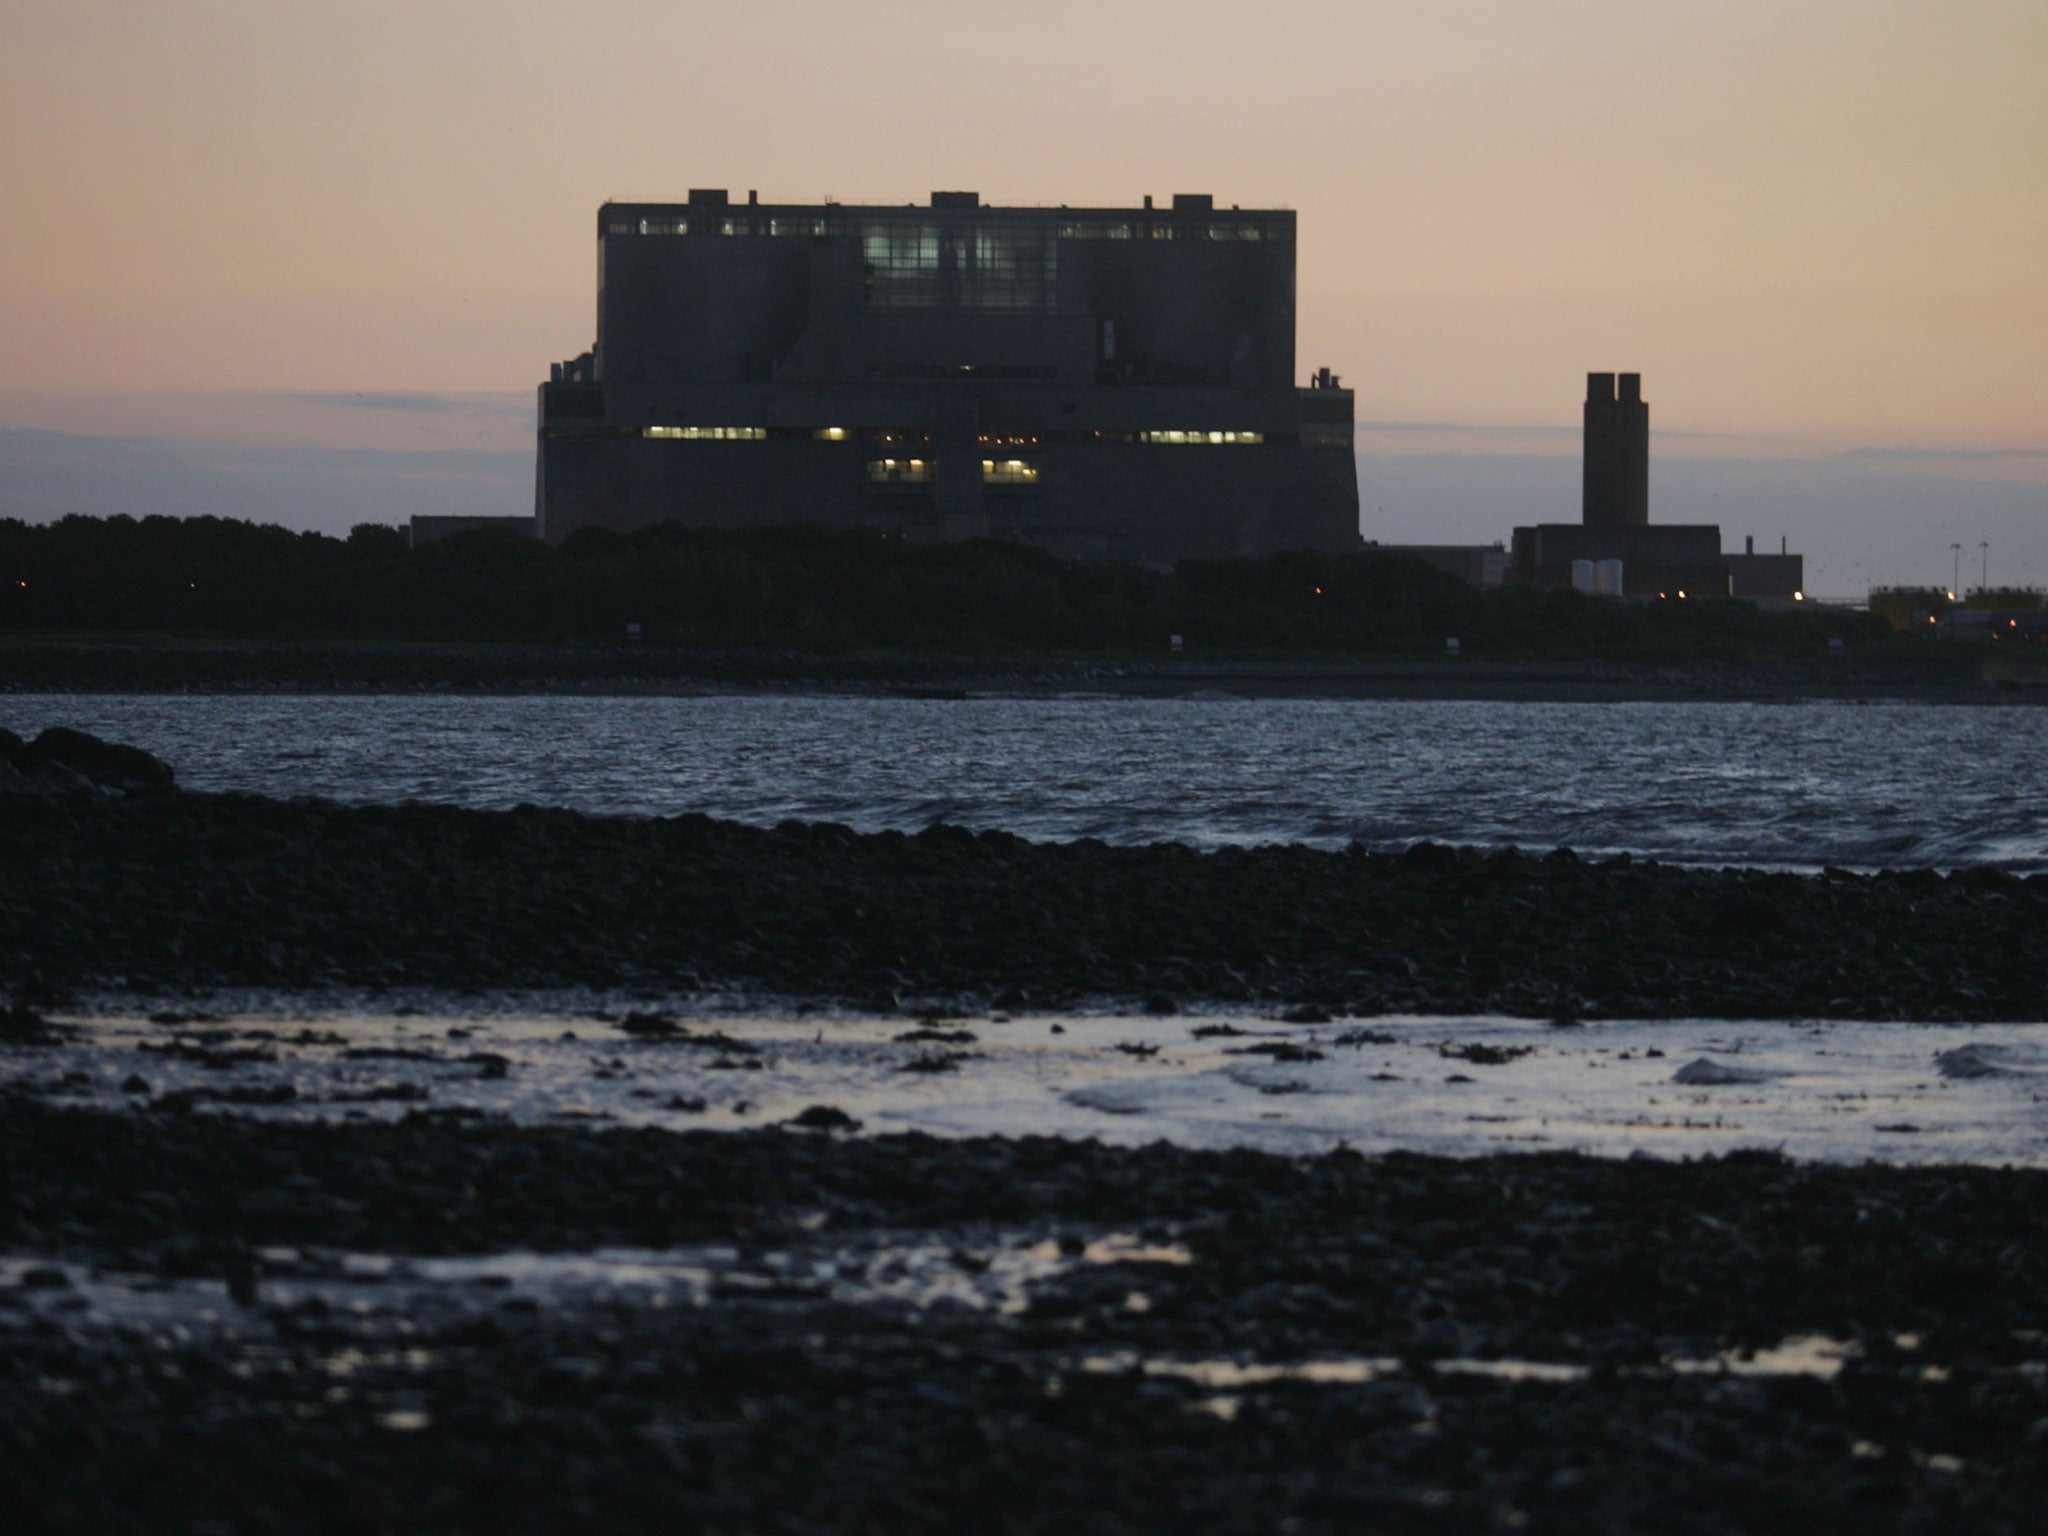 The lights of Hinkley Point Nuclear Power Station are seen on July 17, 2006 in Somerset, England.